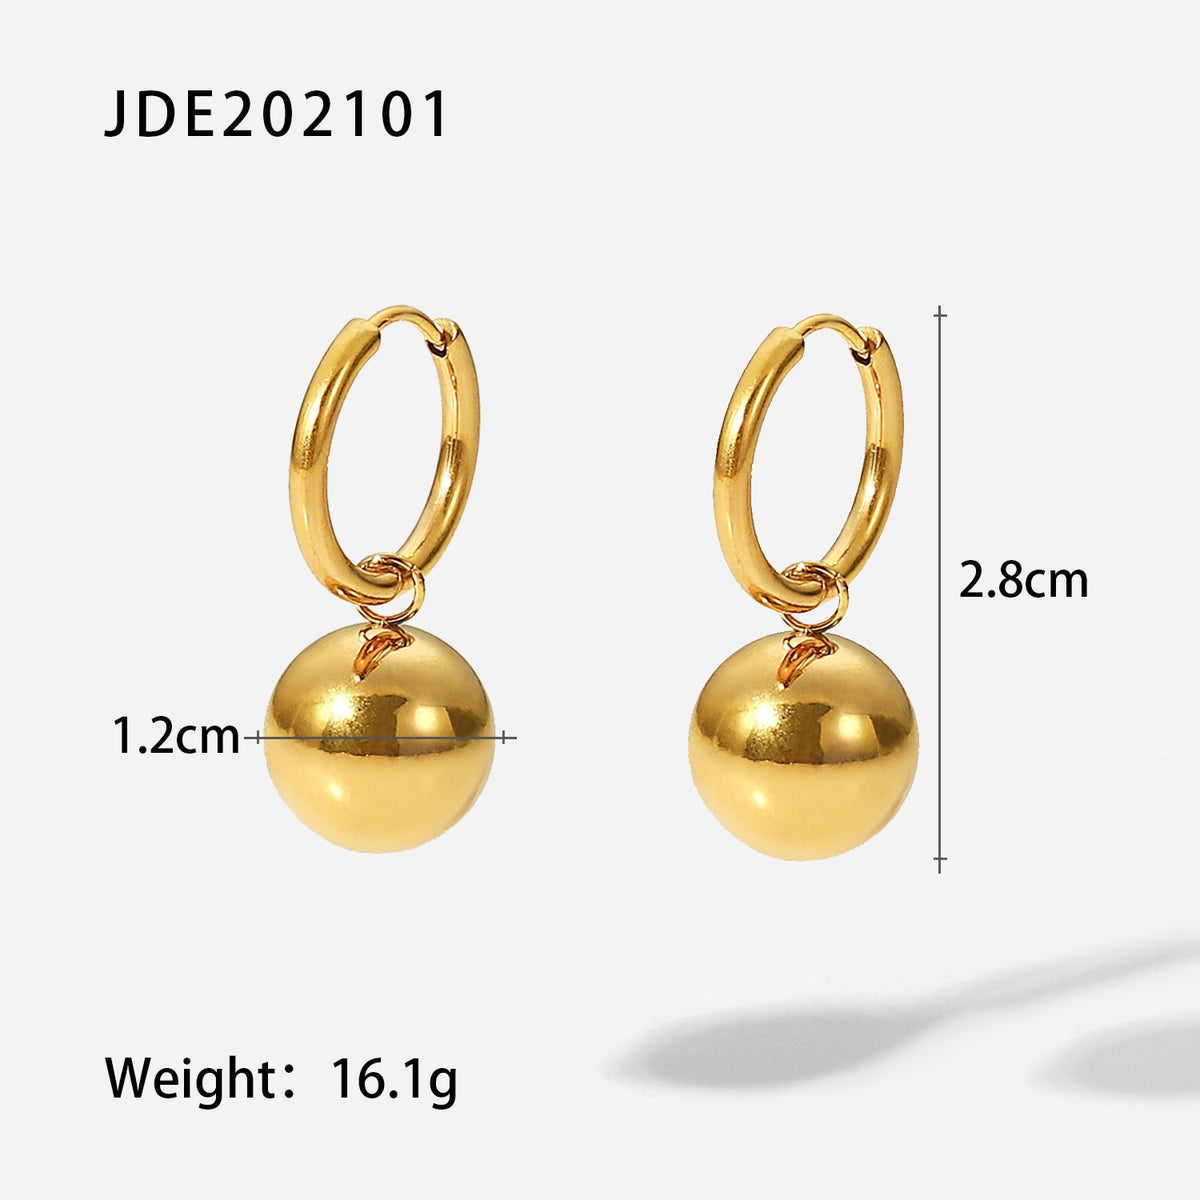 Ins Hot Solid Ball Pendant Earrings Stainless Steel Gold Plated Jewelry Gift Ring Hoop Earrings For Women